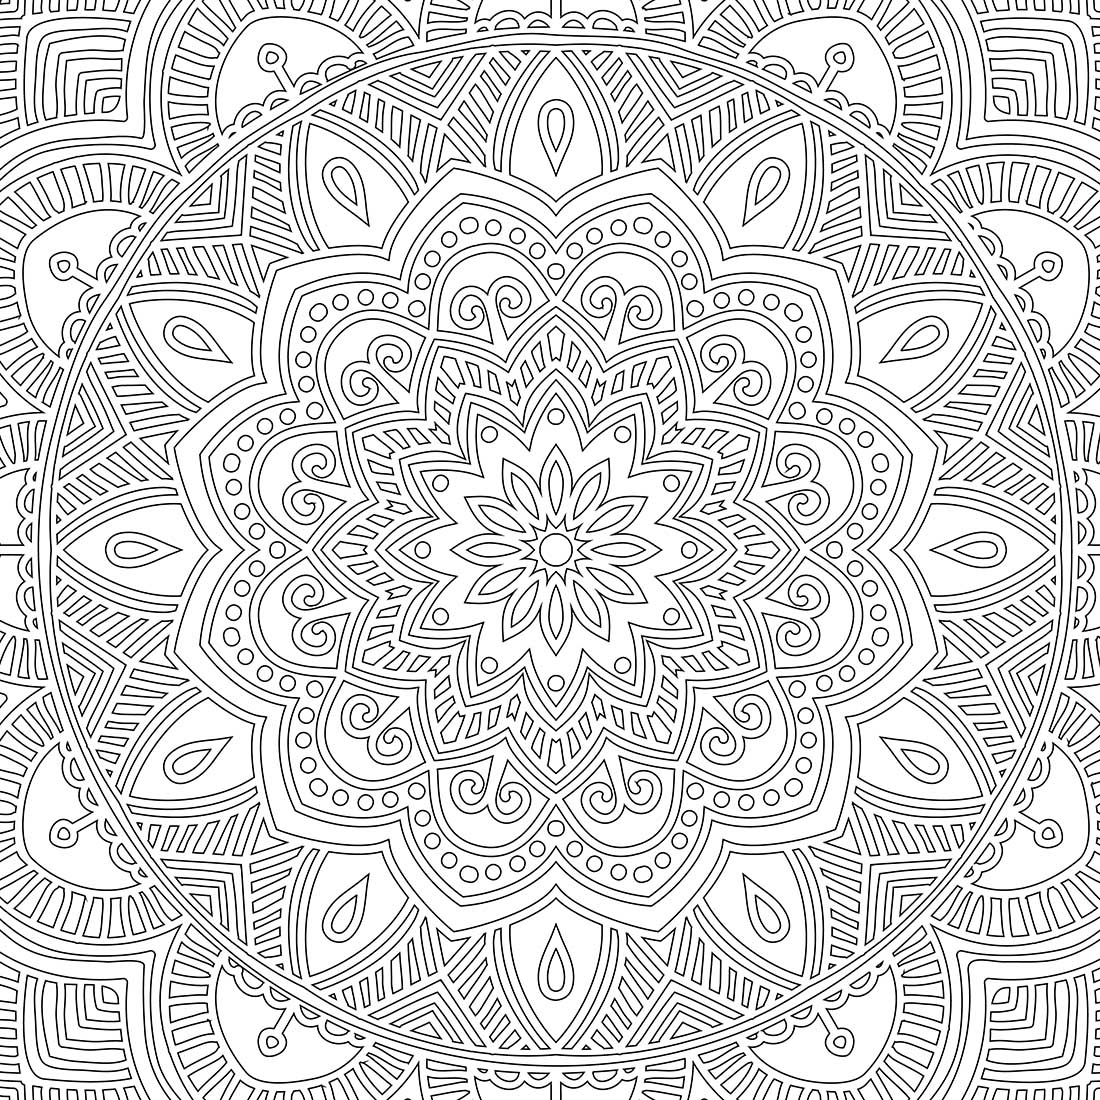 Refreshing Mandala - Colouring Book for Adults Part 1